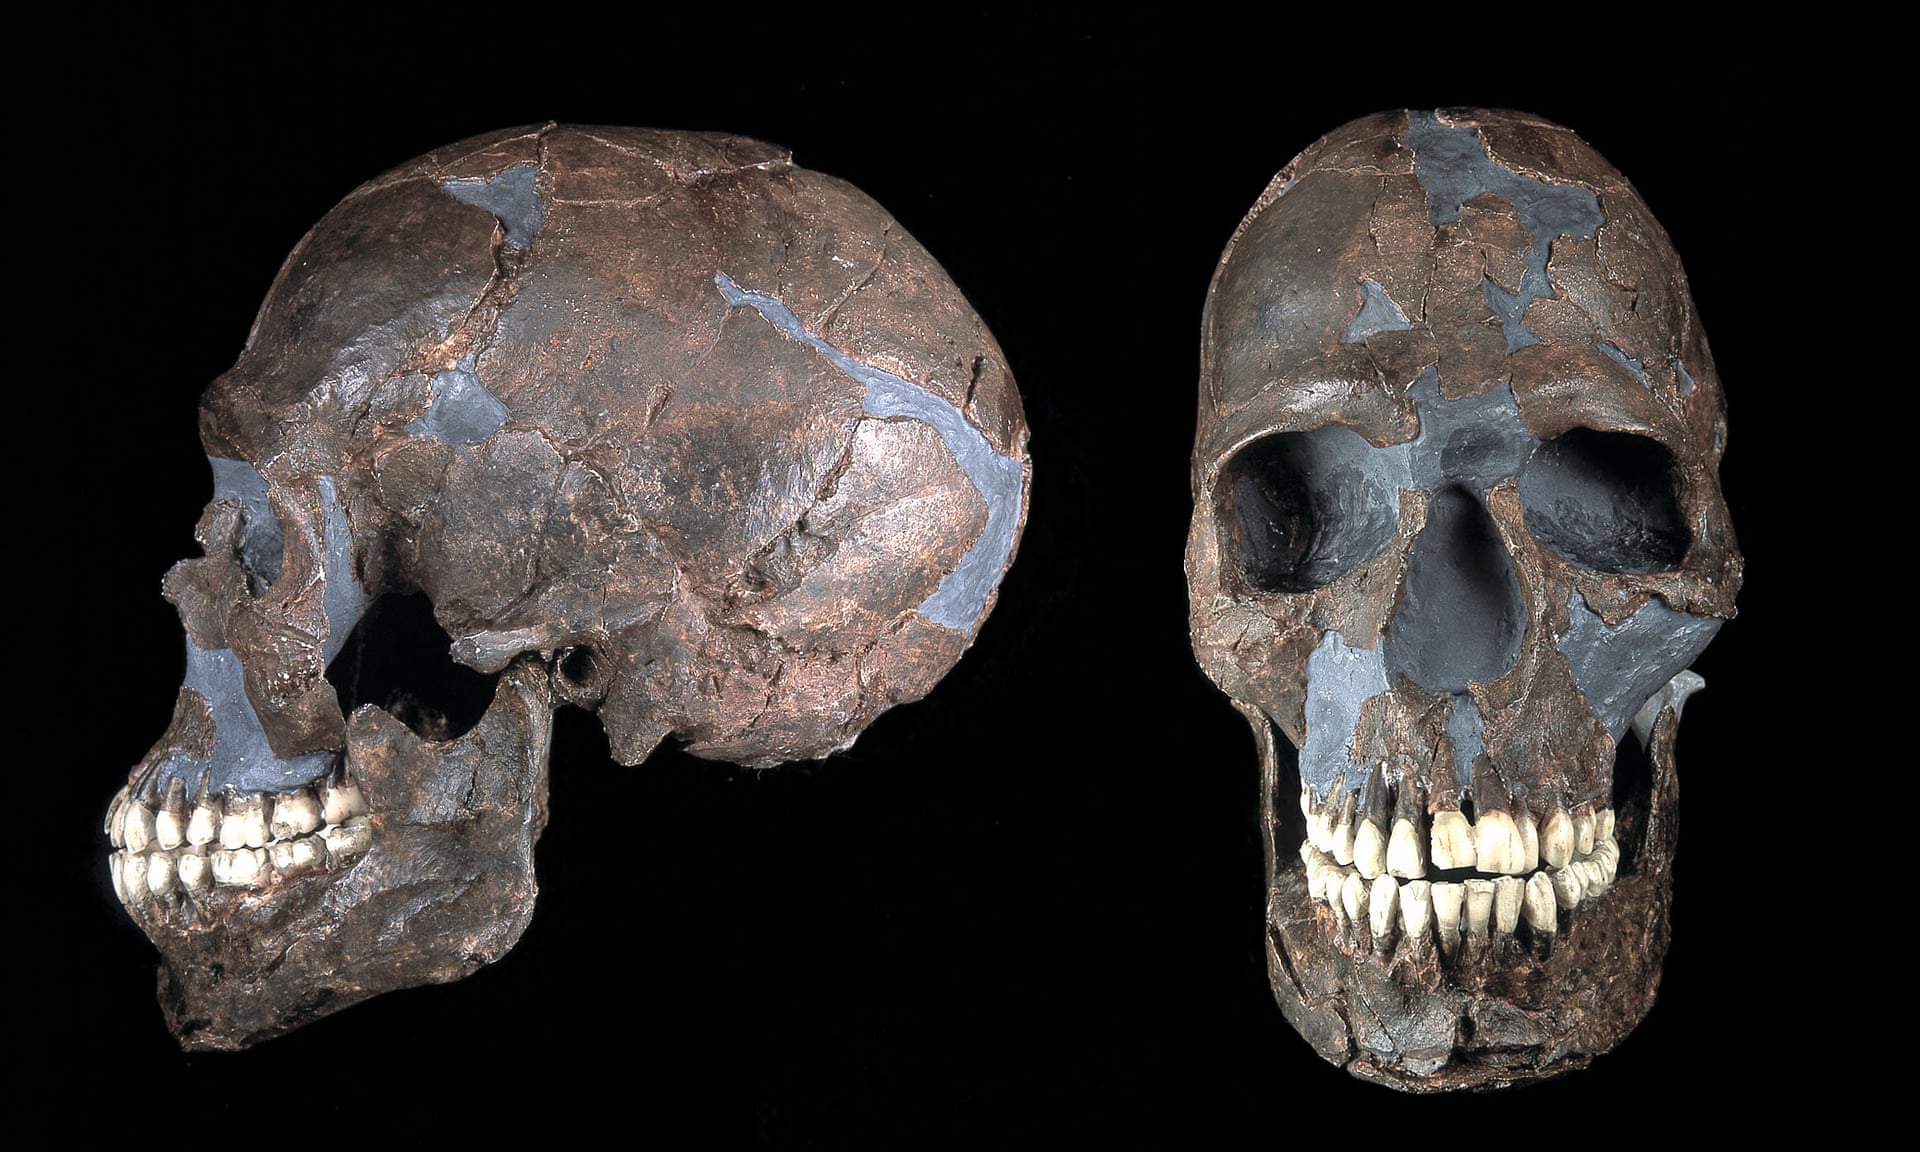 A skull found in the Qafzeh cave in Israal, among the earliest Eurasian homo sapiens to be found.